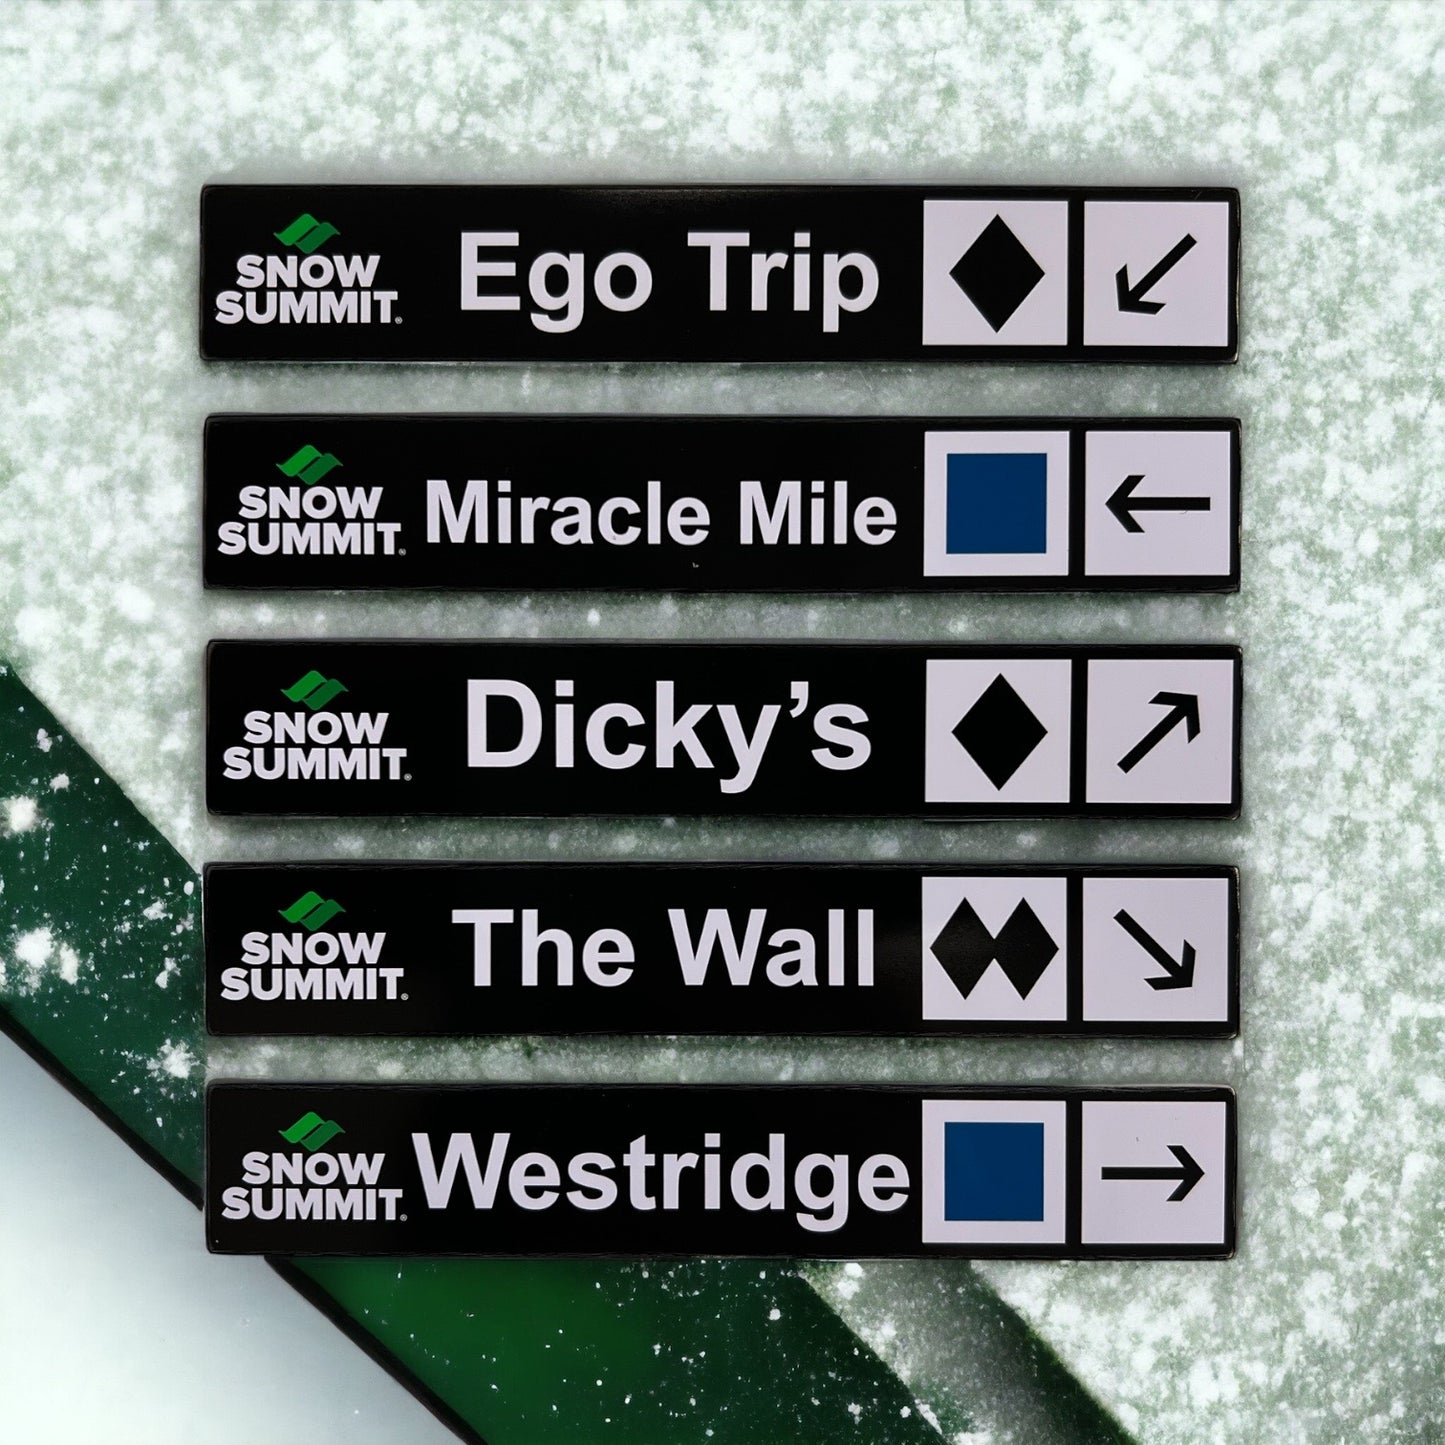 Snow Summit individual trail map magnets for Ego Trip, Miracle Mile, Dicky's, The Wall, and Westridge trails